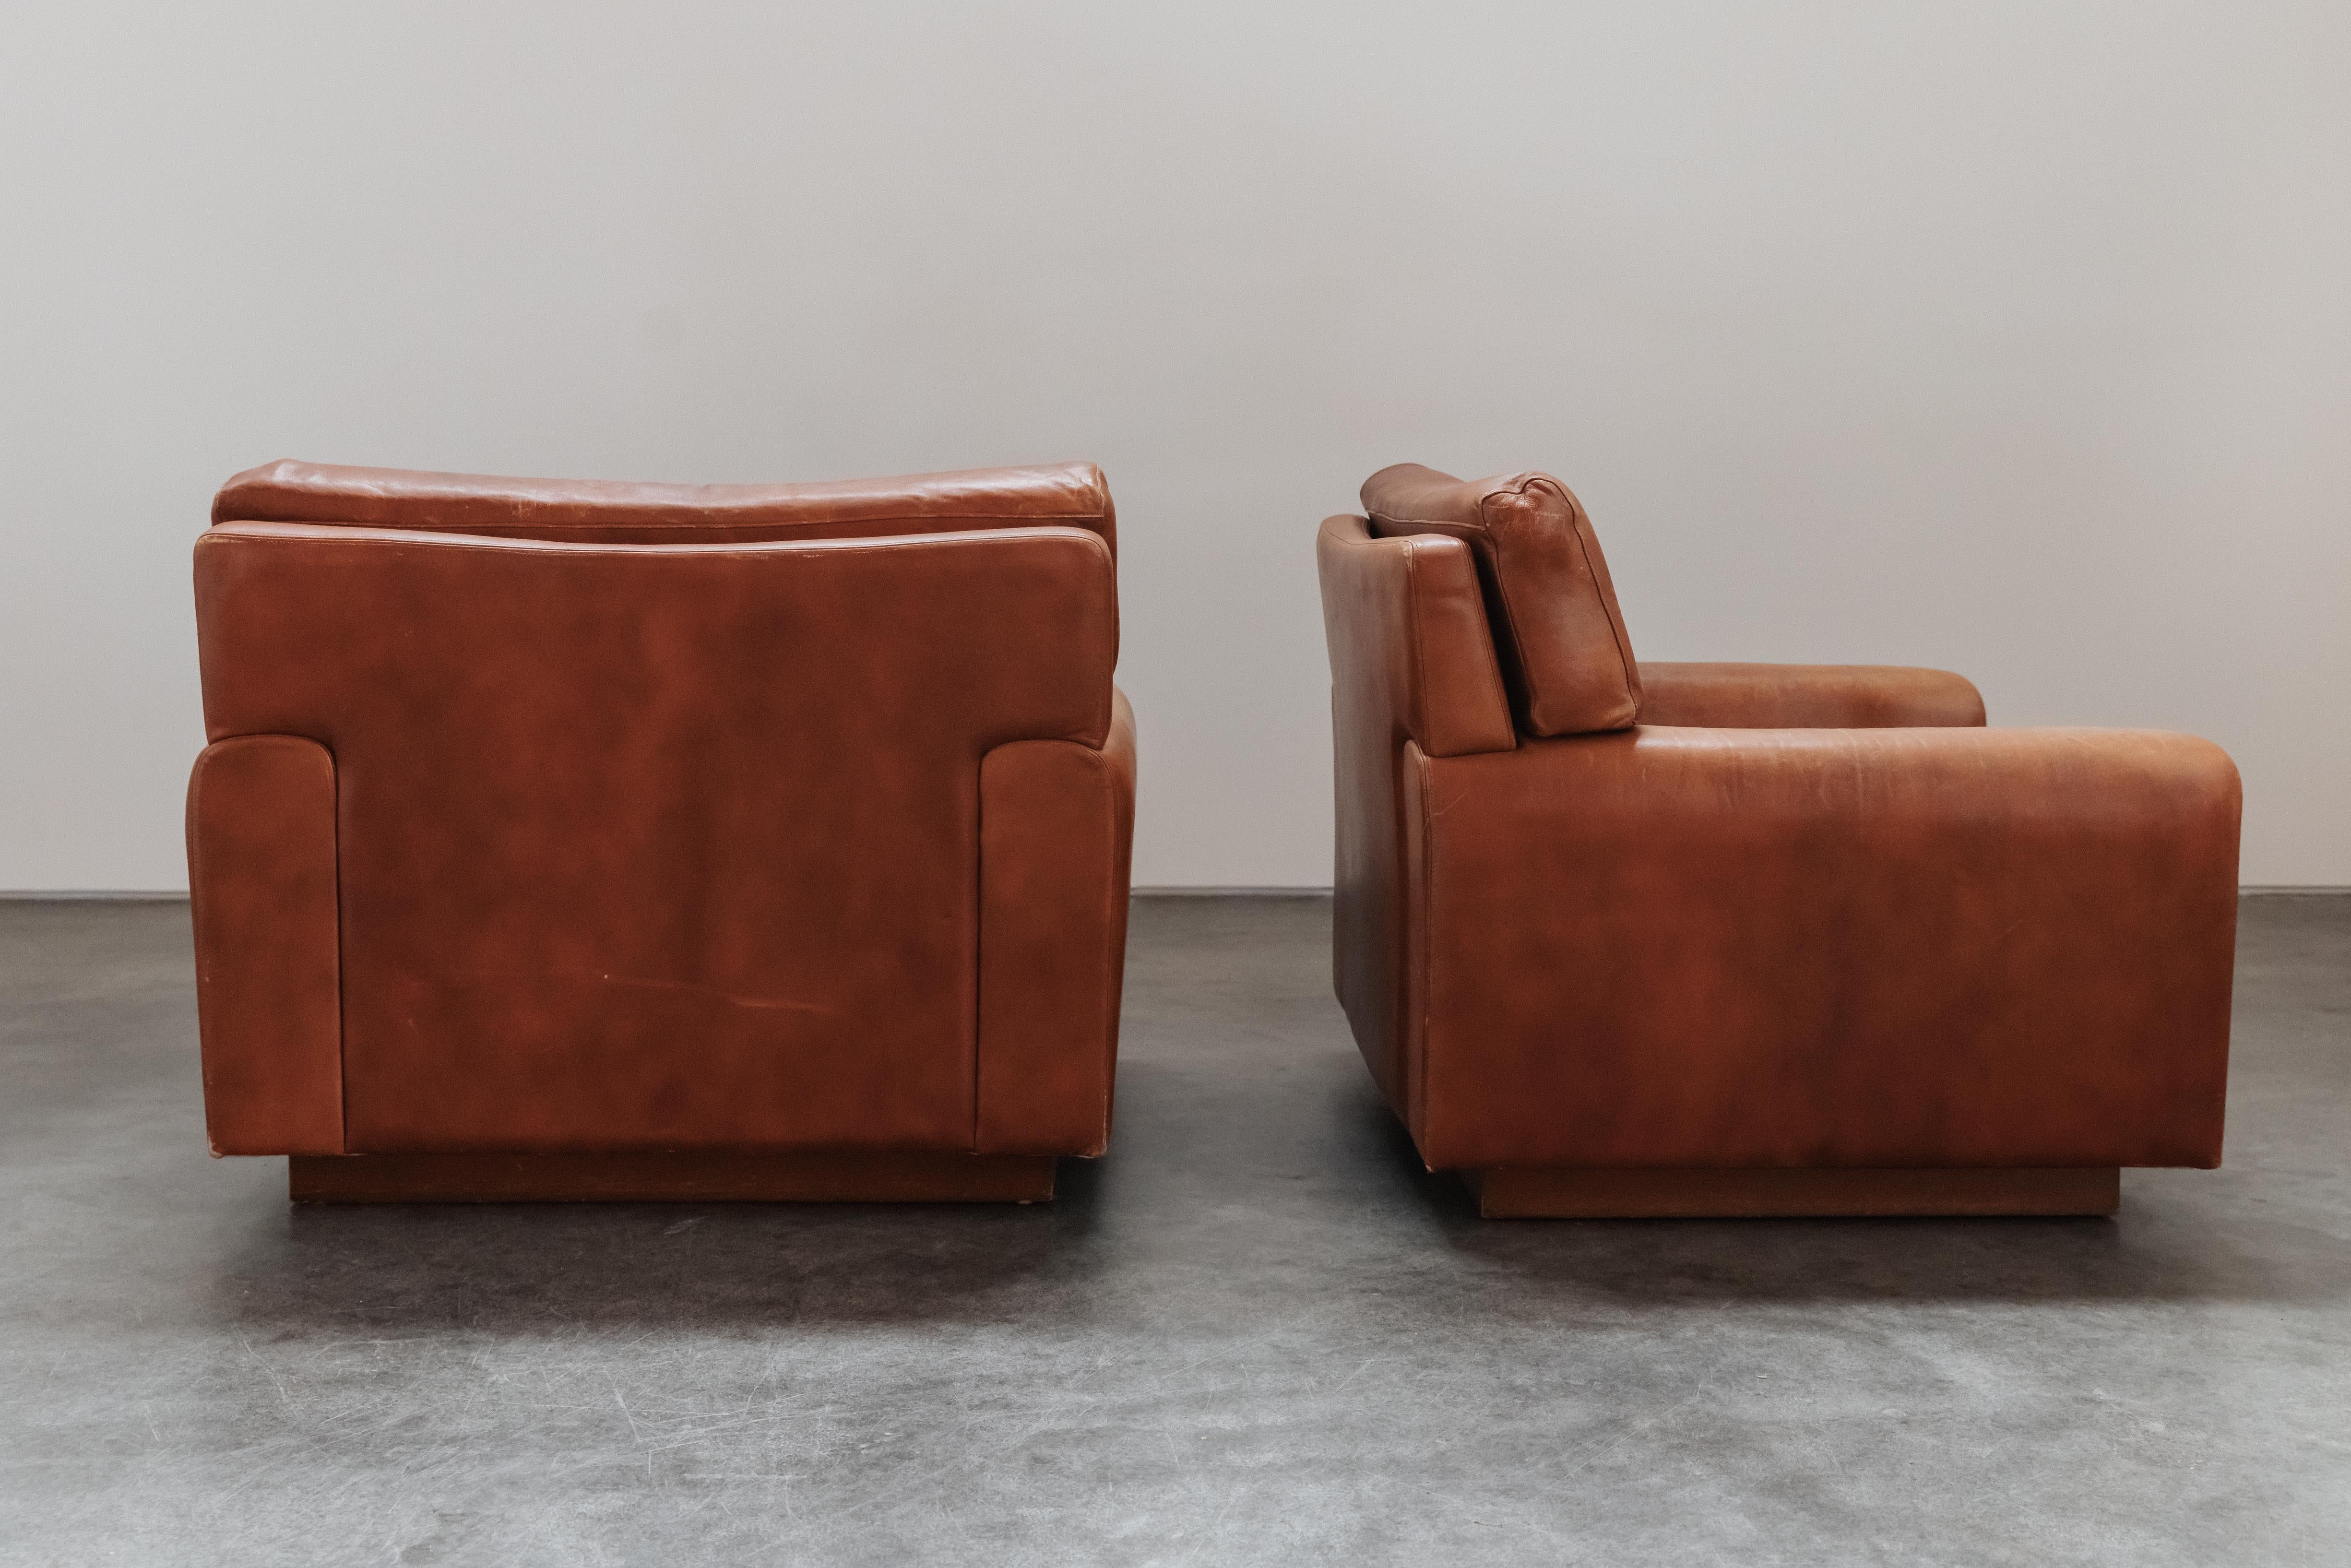 Vintage Pair Of Leather Lounge Chairs By OPE, From Sweden, Circa 1970 For Sale 3